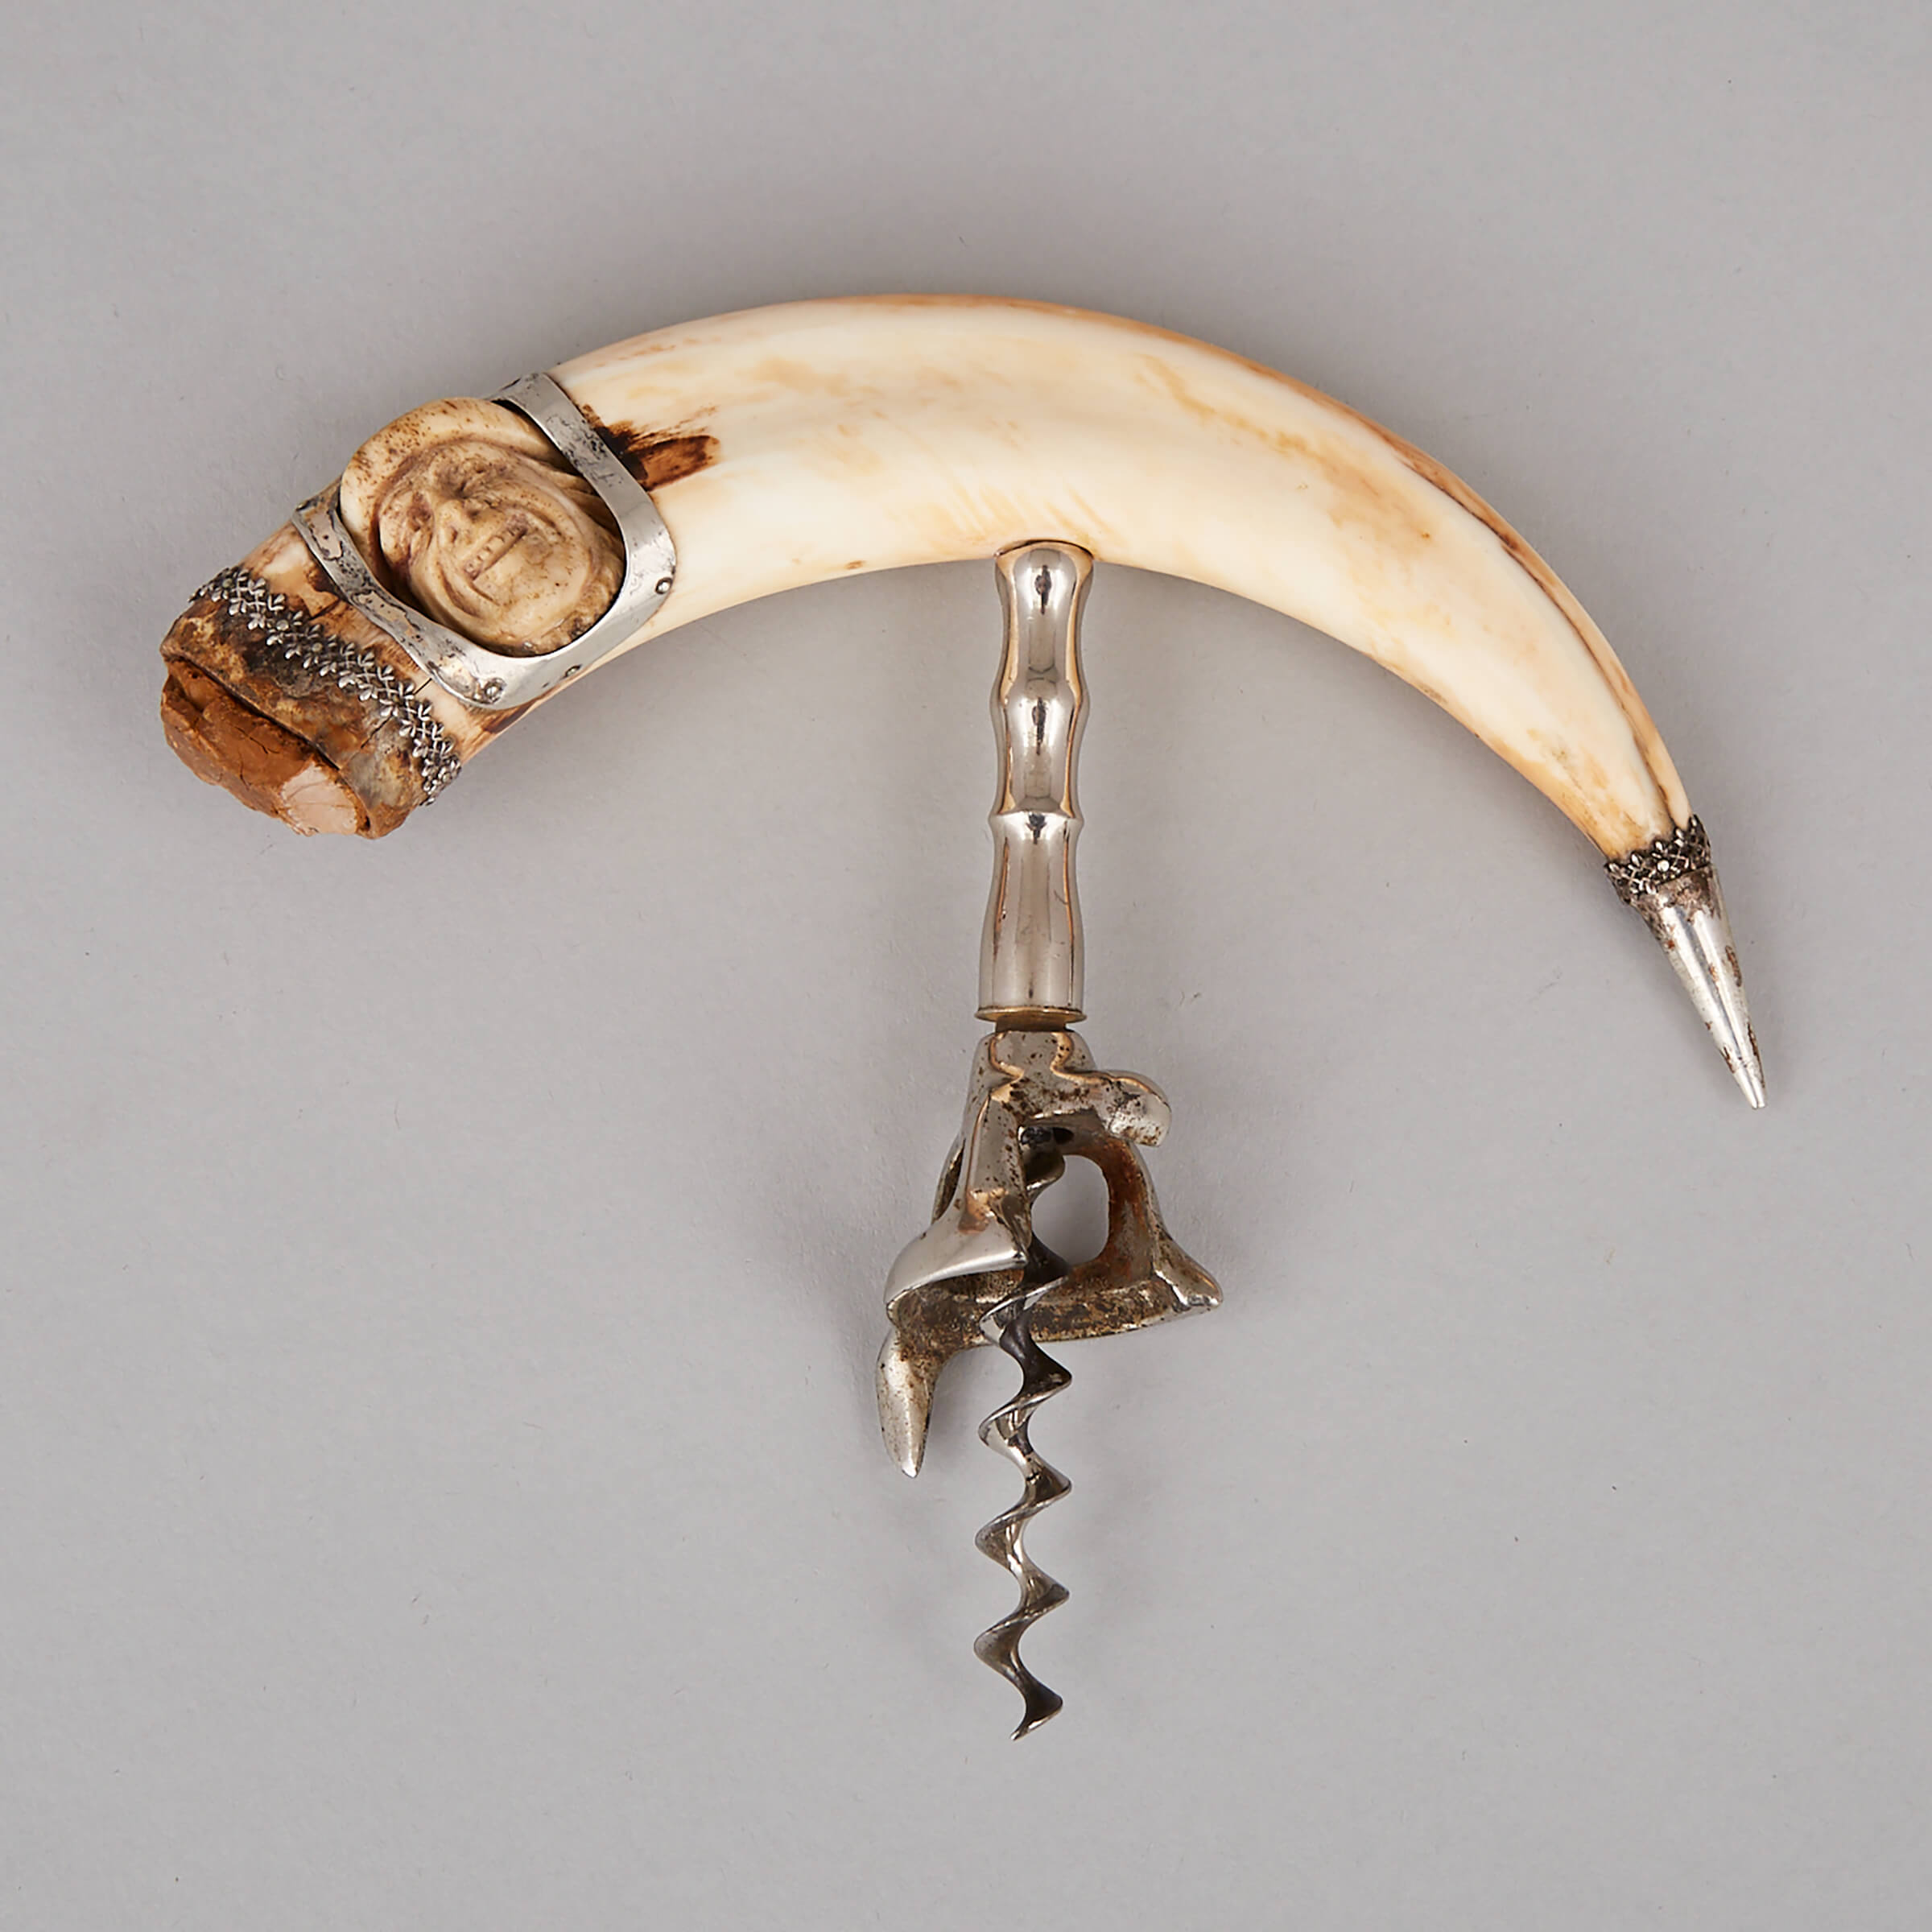 Victorian Silver Mounted Boar Tusk Corkscrew with Inset Carved Bone Articulated Head, c.1900